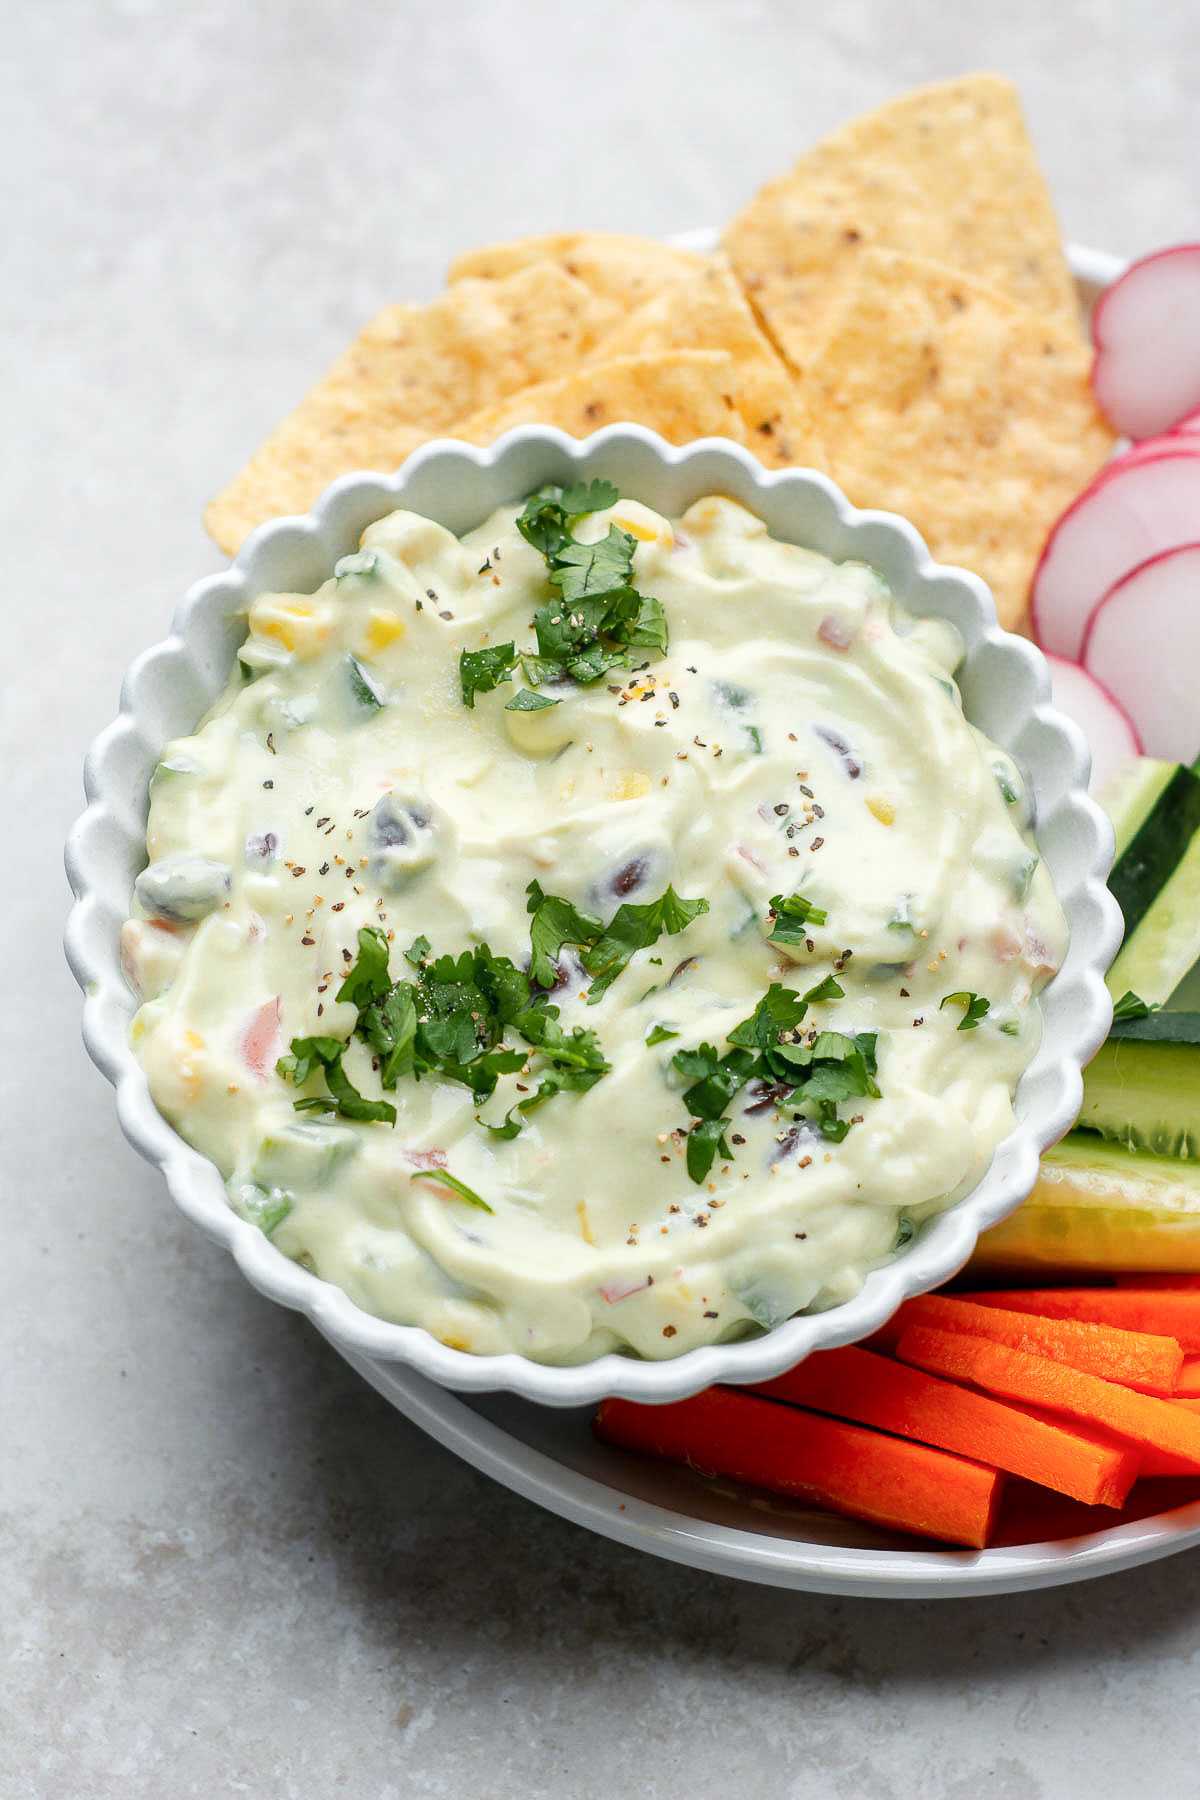 Cottage cheese dip in a bowl garnished with cilantro.